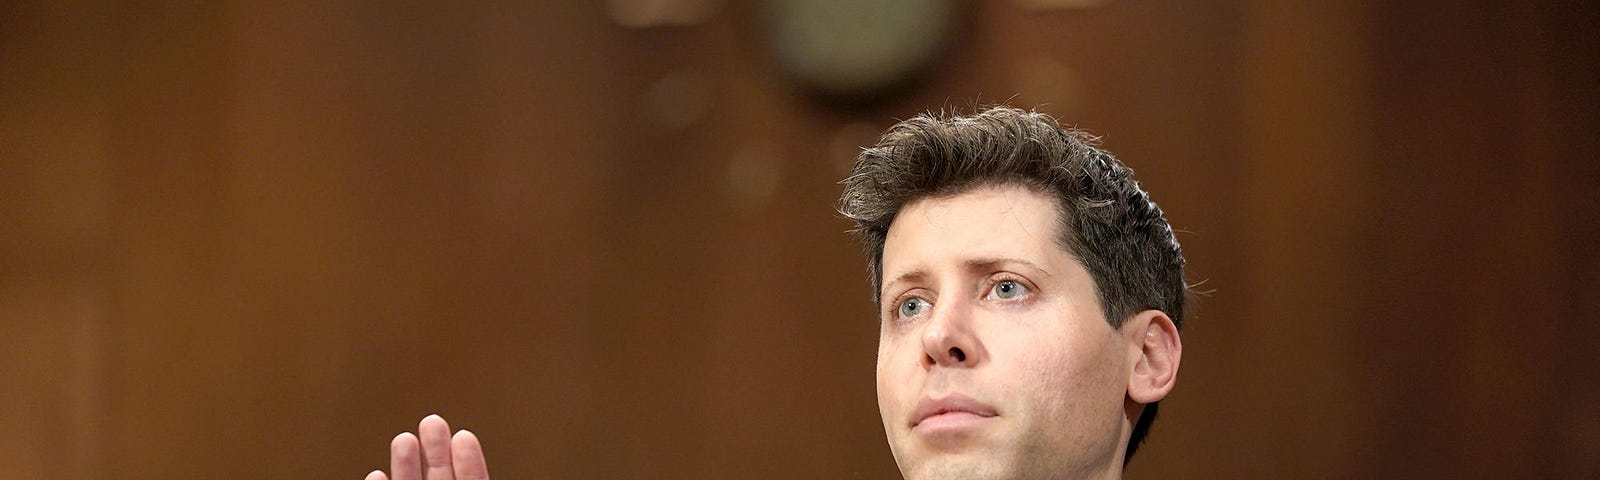 Sam altman pictured taking the oath during a congressional hearing